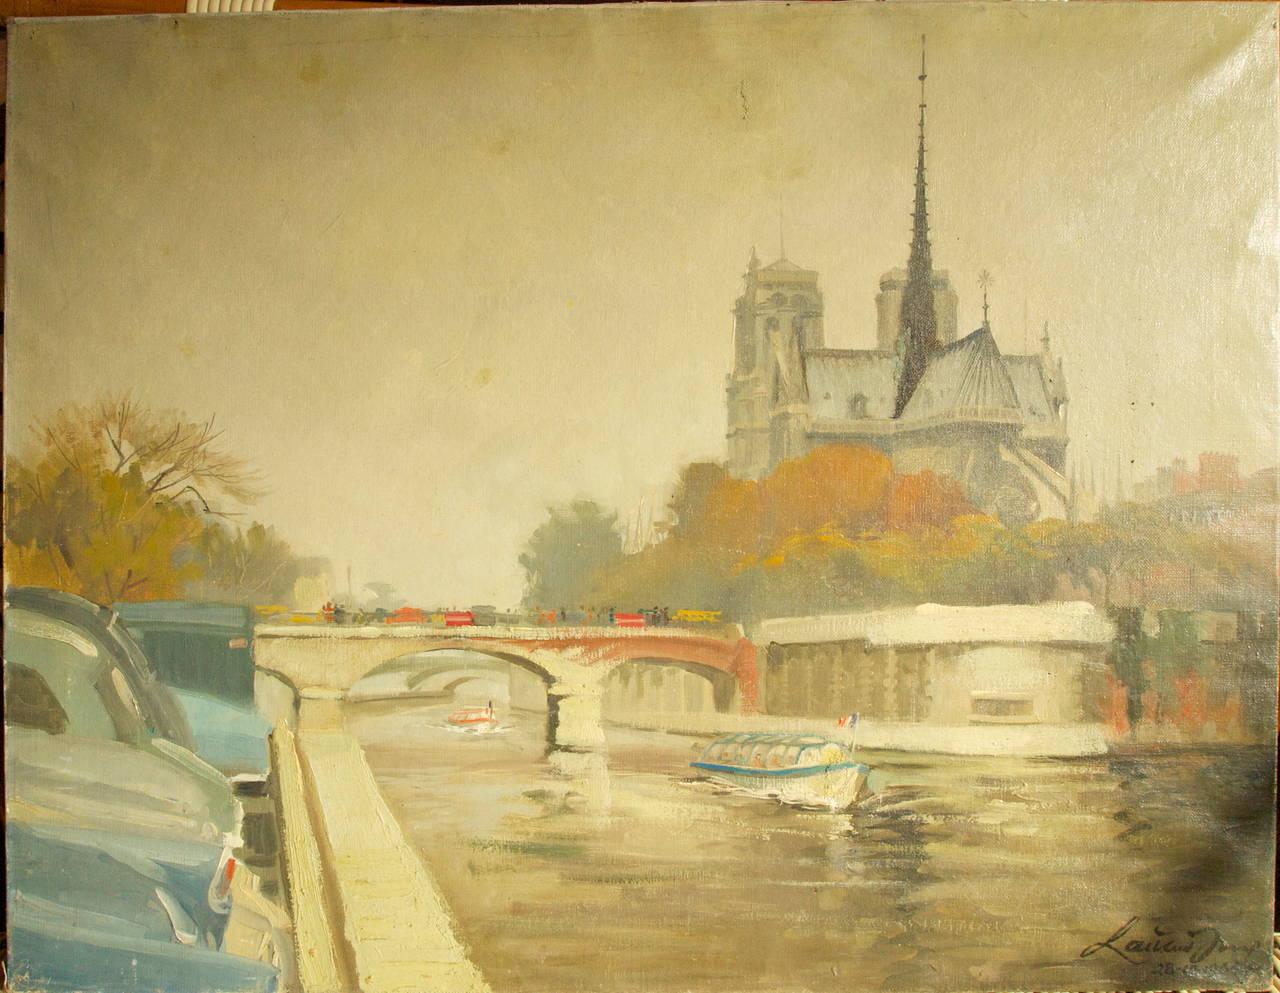 Charming and painterly oil on canvas tourist painting of a scene of 'Ile de la Cite' with Notre-Dame, signed and dated LR:1964. Unframed.